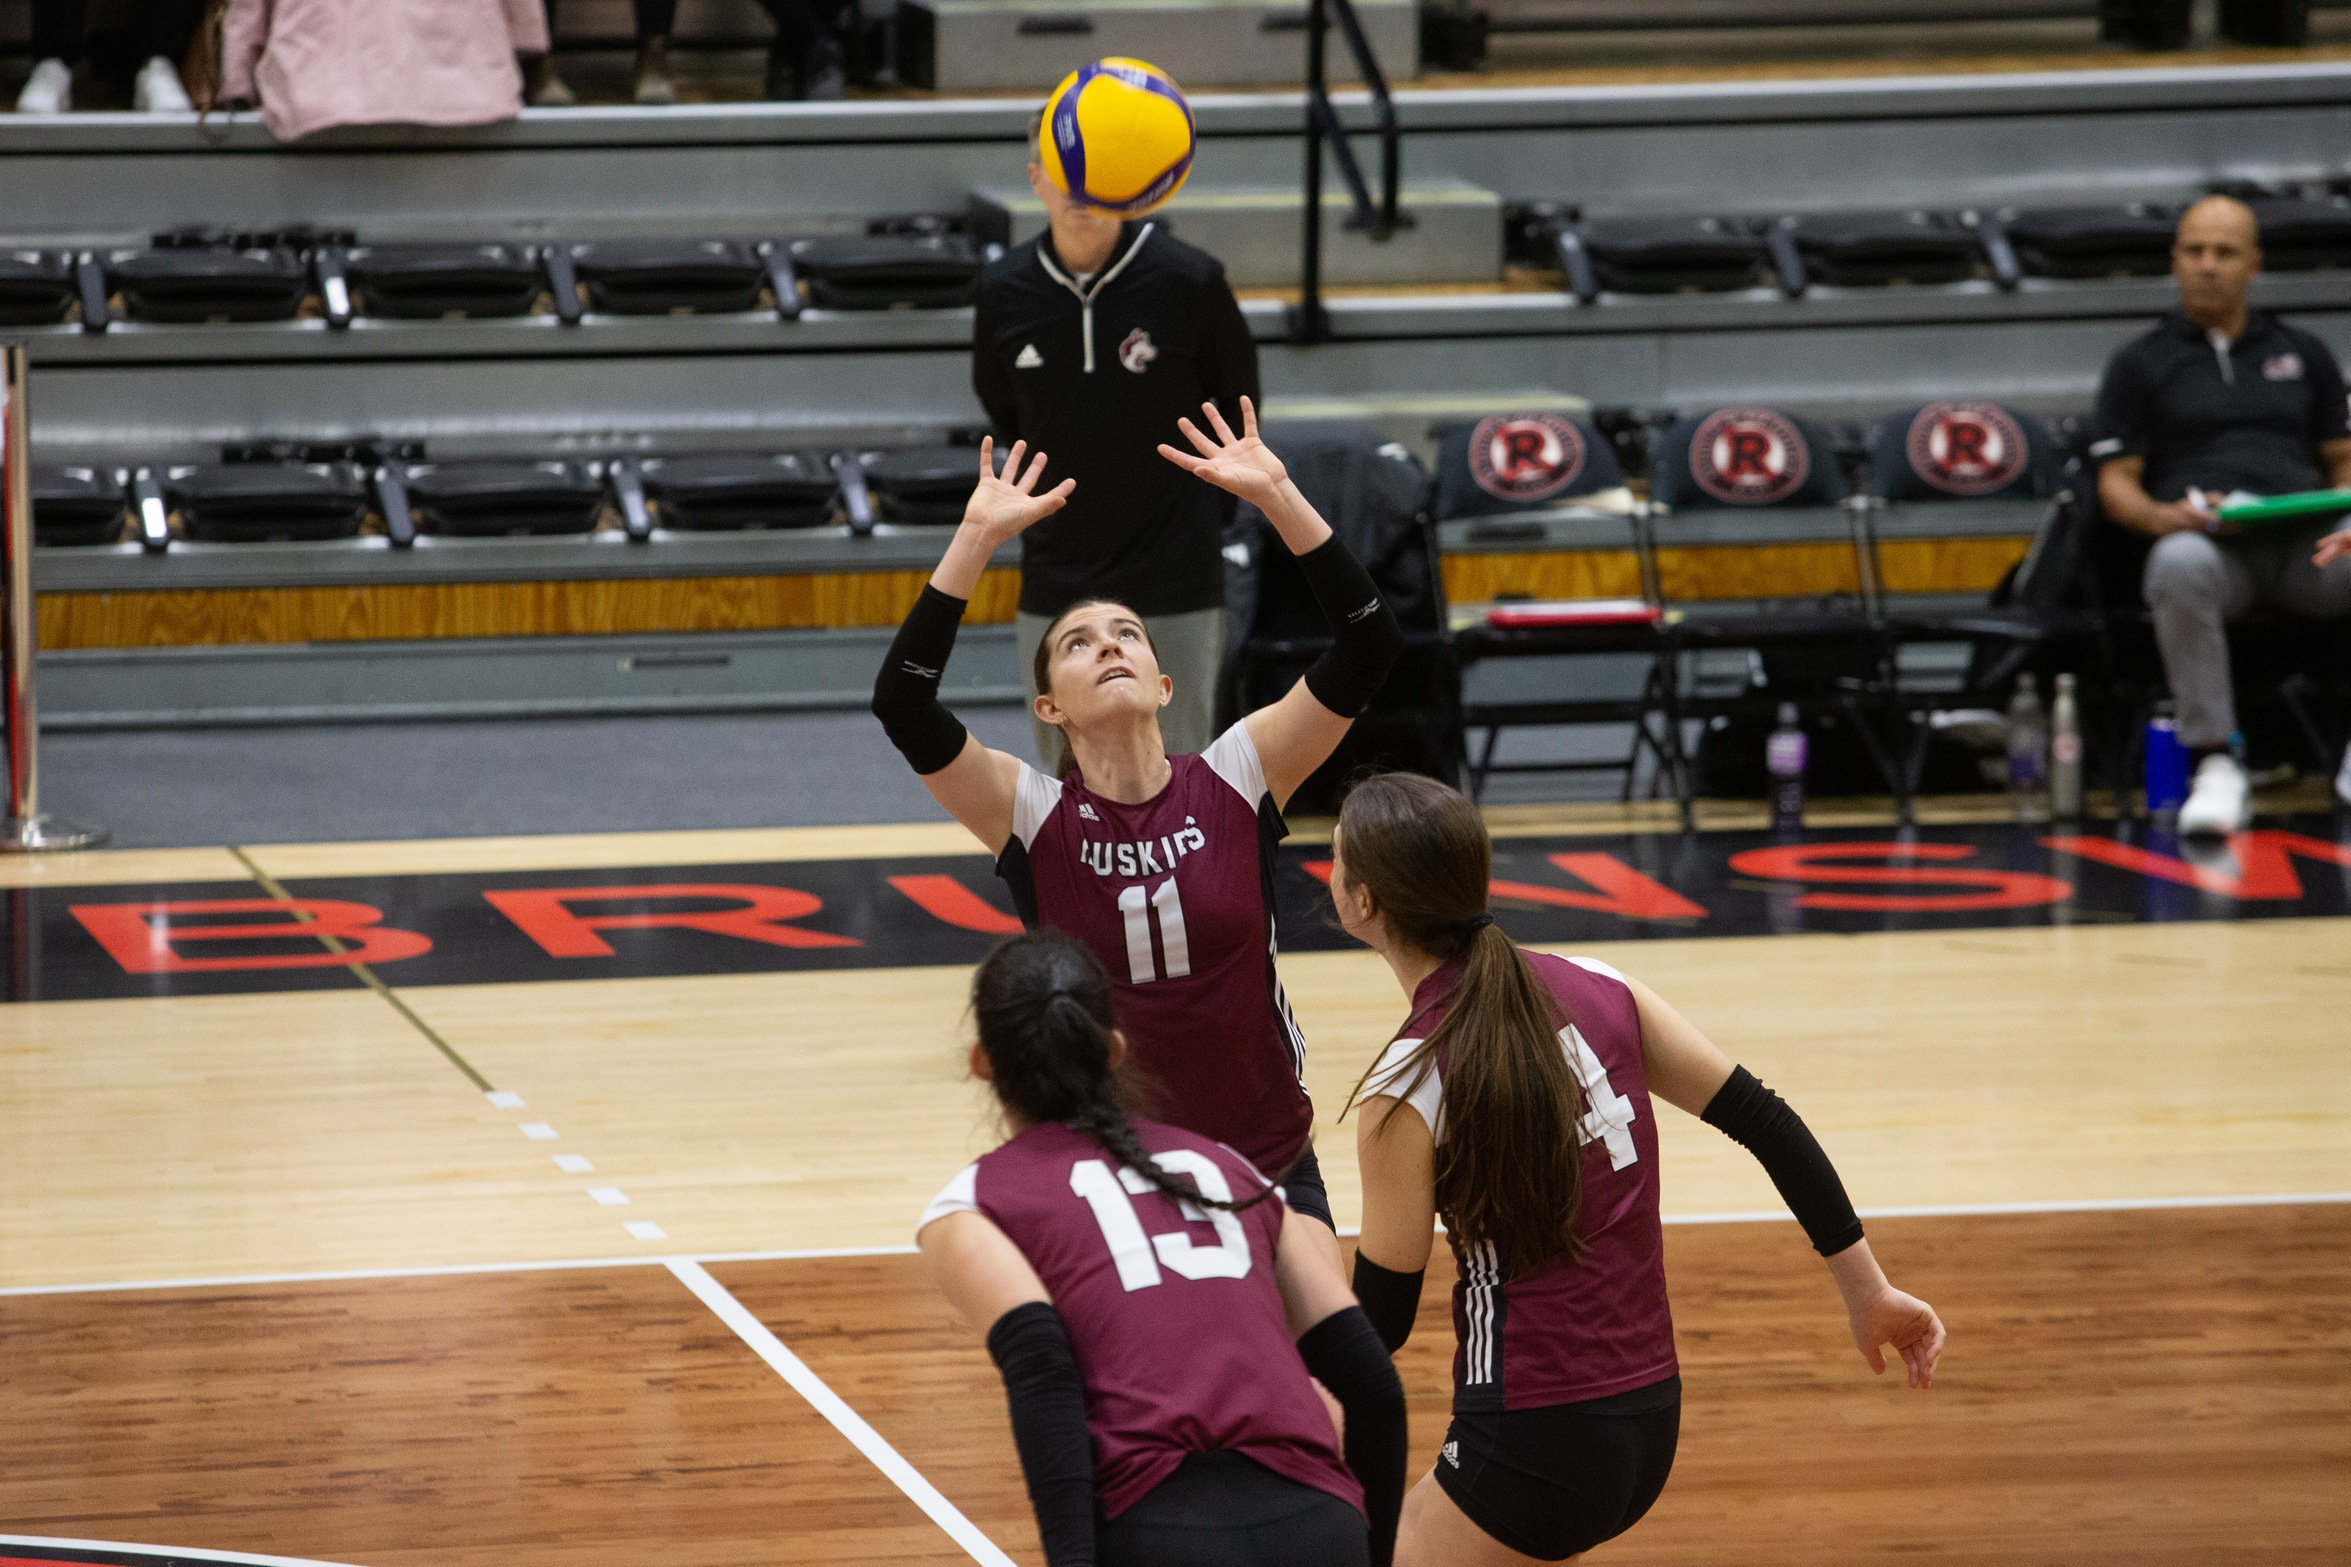 Huskies defeat REDS in five sets for sixth straight win